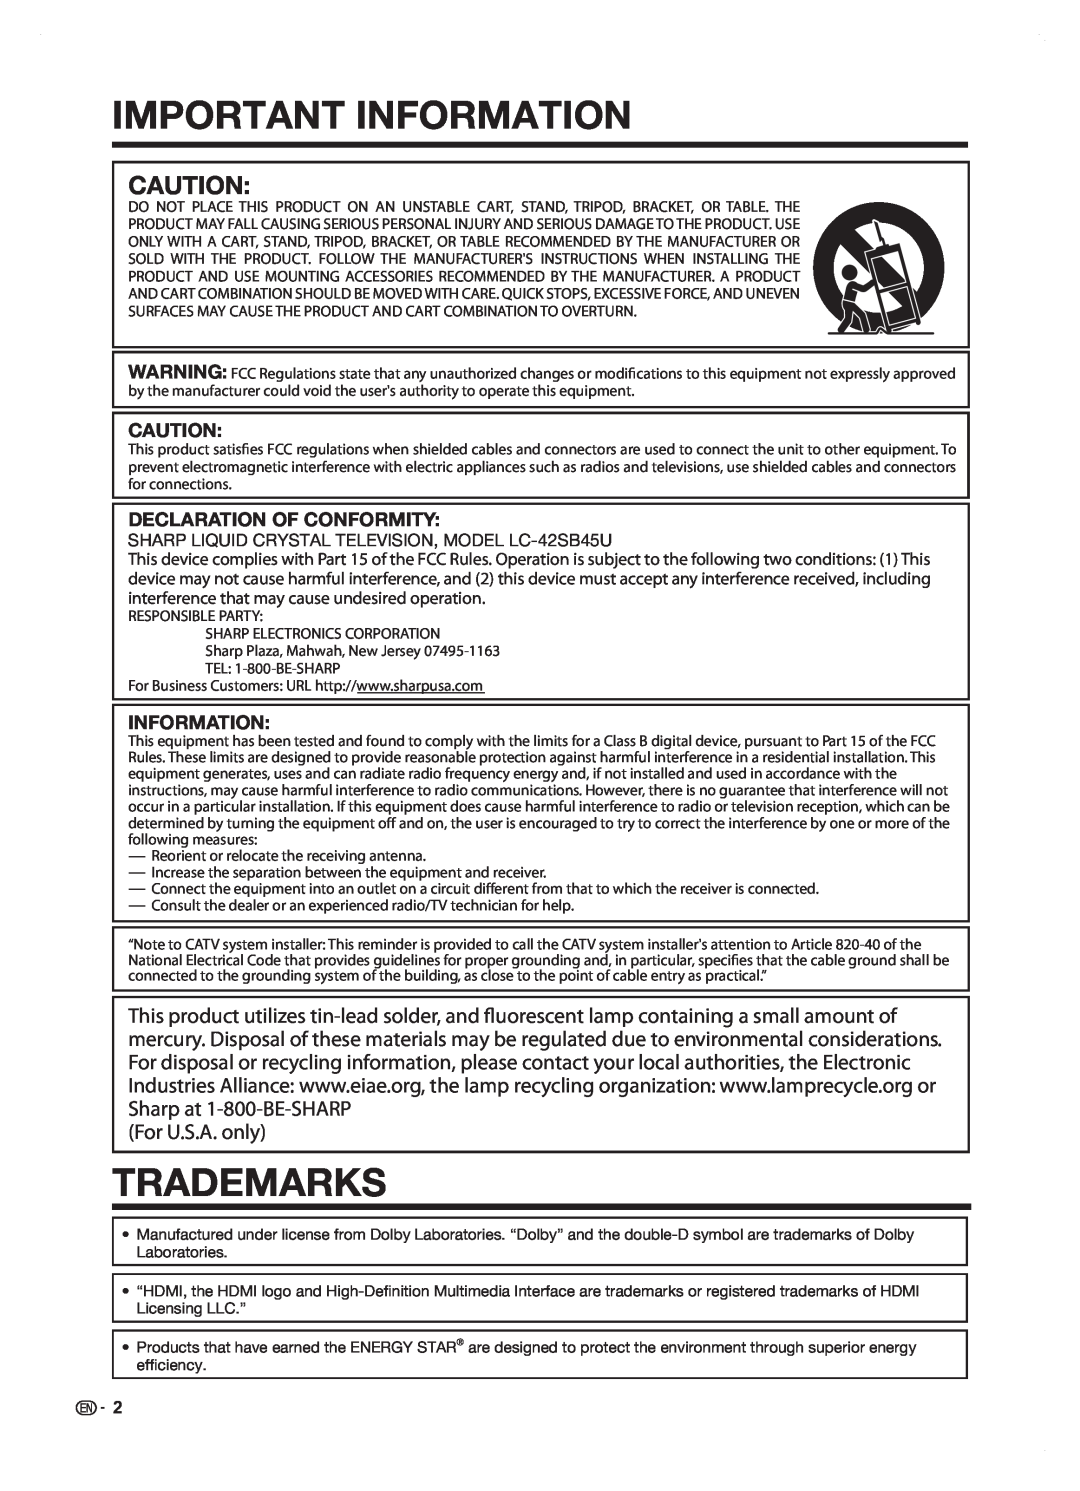 Sharp LC42SB45U operation manual Trademarks, Declaration Of Conformity, Important Information, For U.S.A. only 